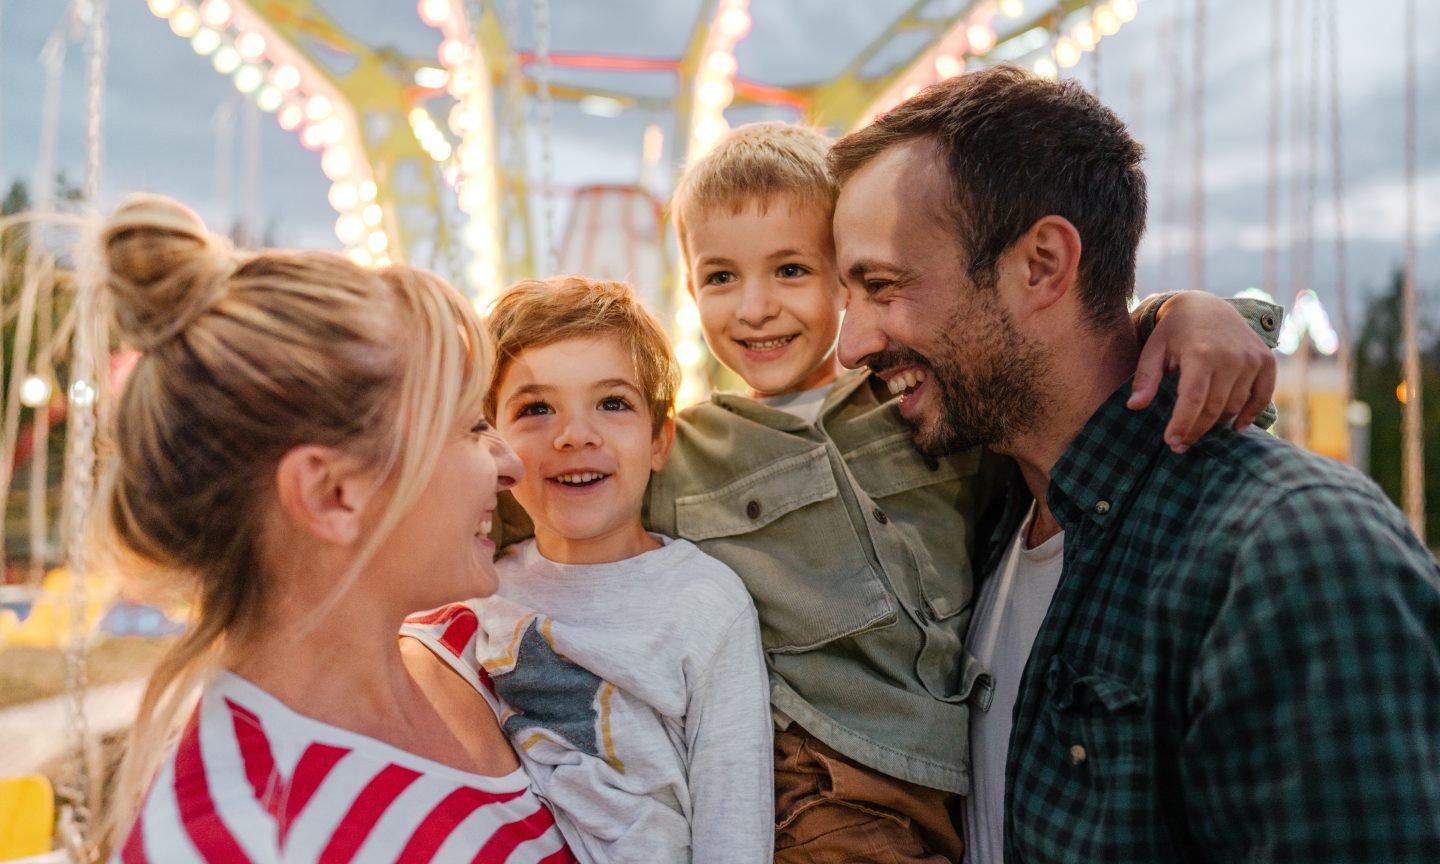 The Disney World Cost for a Family of 4 Might Surprise You